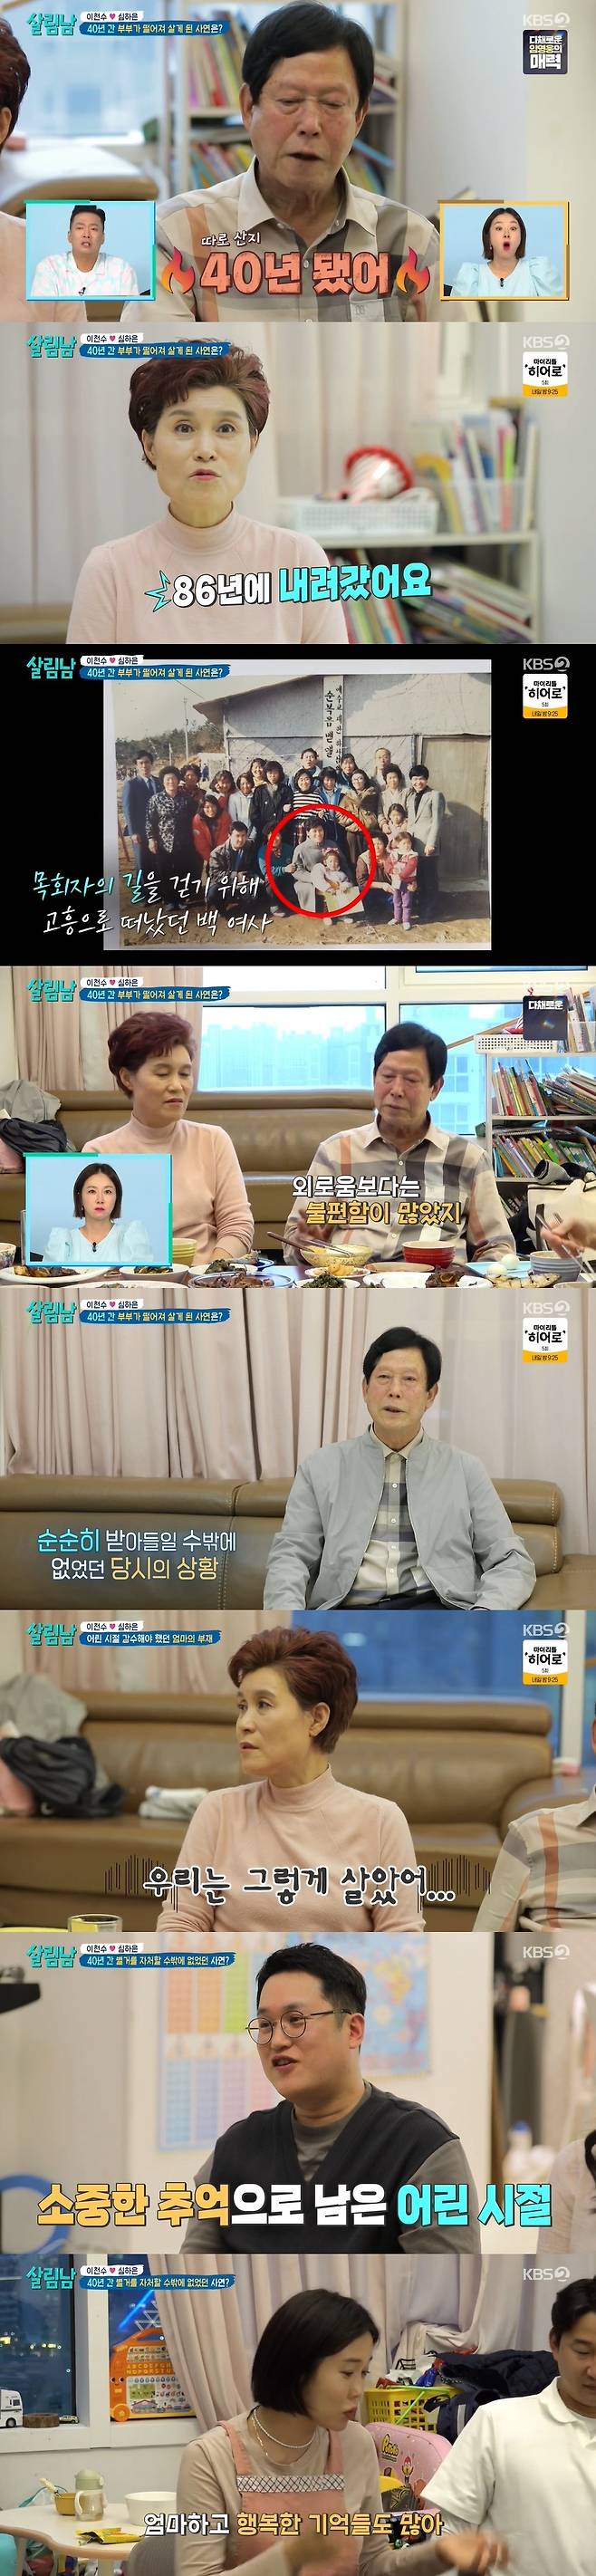 Seoul =) = The Living Men 2 Lee Chun-soo The family history of his wife Shim Ha-eun was revealed.In KBS 2TV The Living Men 2 broadcast on the 24th, Shim Jae-nam, the father of Lee Chun-soos father-in-law and wife Shim Ha-eun, appeared for the first time.On this day, Shim Jae-nam showed unusual charisma from his appearance.In an interview with the production team, he said, I was disappointed that I could not express it in words, he said. I expected to be a national representative in 2002, but I watched soccer, but I thought it was okay.Shim Ha-eun said that her father cooked well in the past, and Lee Chun-soo asked, Did your father do it because Zhang Mo was busy?Shim Ha-eun said, There was only Father at home, and Lee Chun-soo asked Zhang Mo, You were in Goheung early?Lee Chun-soo Zhang Mo revealed his family history by saying, Ha-eun went down to Goheung when he walked.I have been living apart from my father for 40 years, he said. I asked him to help me go to A Month in the Country for work, and I went down in 1986, he confessed.I went down to Goheung with my children and lived in A Month in the Country. After that, my sons school principal told me to send my son to Seoul, so the children went to Father and Seoul. Lee Chun-soo asked his father-in-law, Are not you lonely? The father-in-law replied, It was more uncomfortable than loneliness.Later, the father-in-law said in an interview with the production team, It was bad (separation), and frankly, It was actually bad when (my wife) said she was going to church when she had to live with me.But it was the seed I sowed, and I had to take it, he said, because I love and love my wife and I have two children.Zhang Mo said, My father has suffered a lot and has done his best to take care of the children. He said, Ive always been sick, its been 40 years already.Shim Ha-eun also talked about her mothers absence as a child, saying, When my mother came to school, my aunt went, and I played at my aunts house, she said.Shim Ha-euns brother also said, It was when I was in school that I stayed at Cheil Memory. In particular, Shim Ha-euns brother was an executive at school and said, My mother had to give me a reason for not coming to school.Lee Chun-soo said, My mother would not have much in the picture, and Zhang Mo replied, We lived like that.Later, Zhang Mo said, There were some good things and inconveniences (about the couple living separately), adding, It was good to do what I wanted to do, but it was uncomfortable when I wanted to see my family.Shim Ha-eun comforted her mother, saying, But there are many happy memories.Zhang Mo said,  (My husband) had a hard time, and said, But Father was so good and the children grew up well, and I am grateful for the dedication of the father who took care of the children.